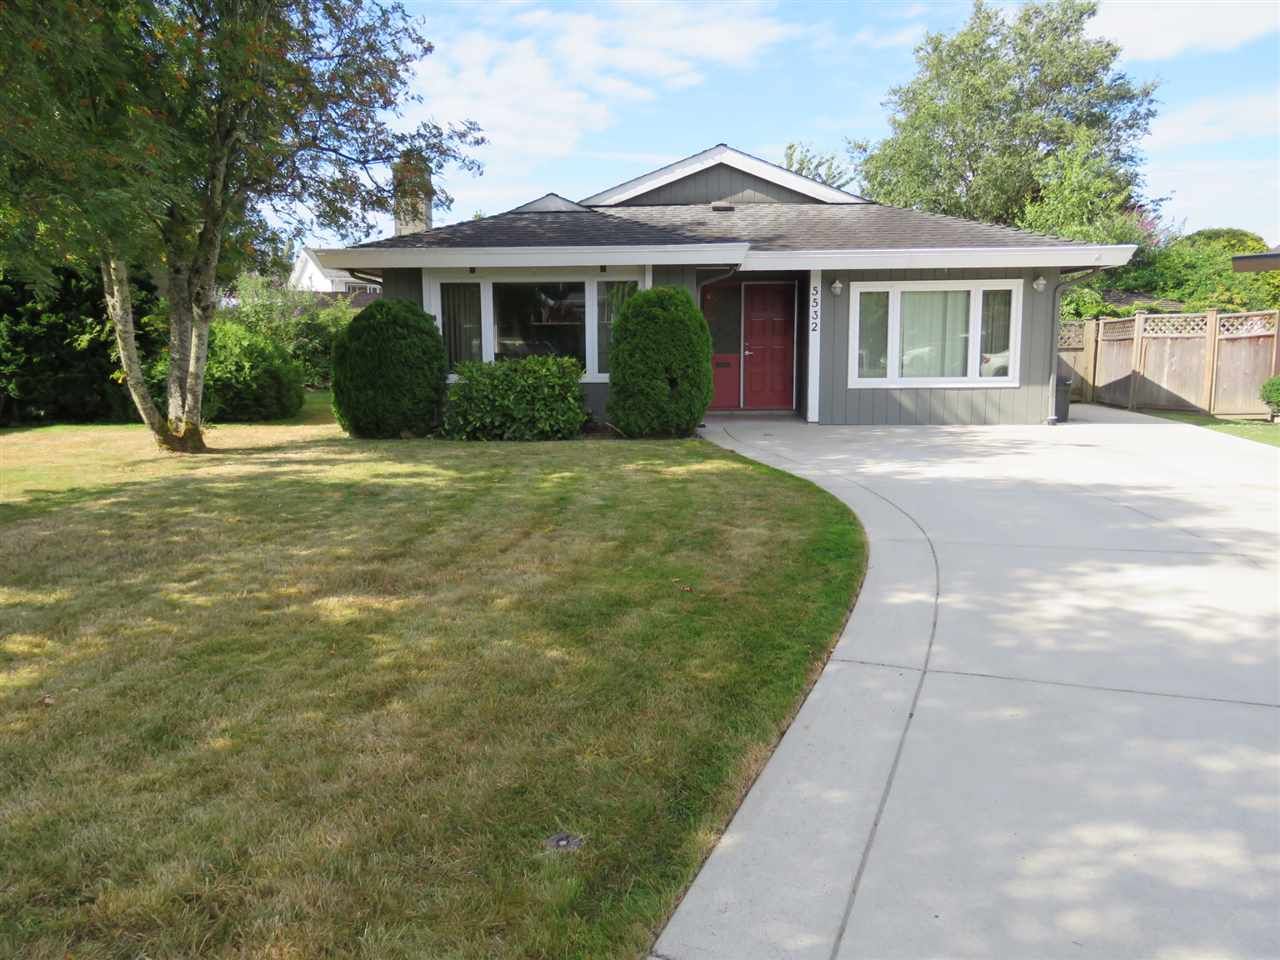 I have sold a property at 5532 46 AVE in Delta
